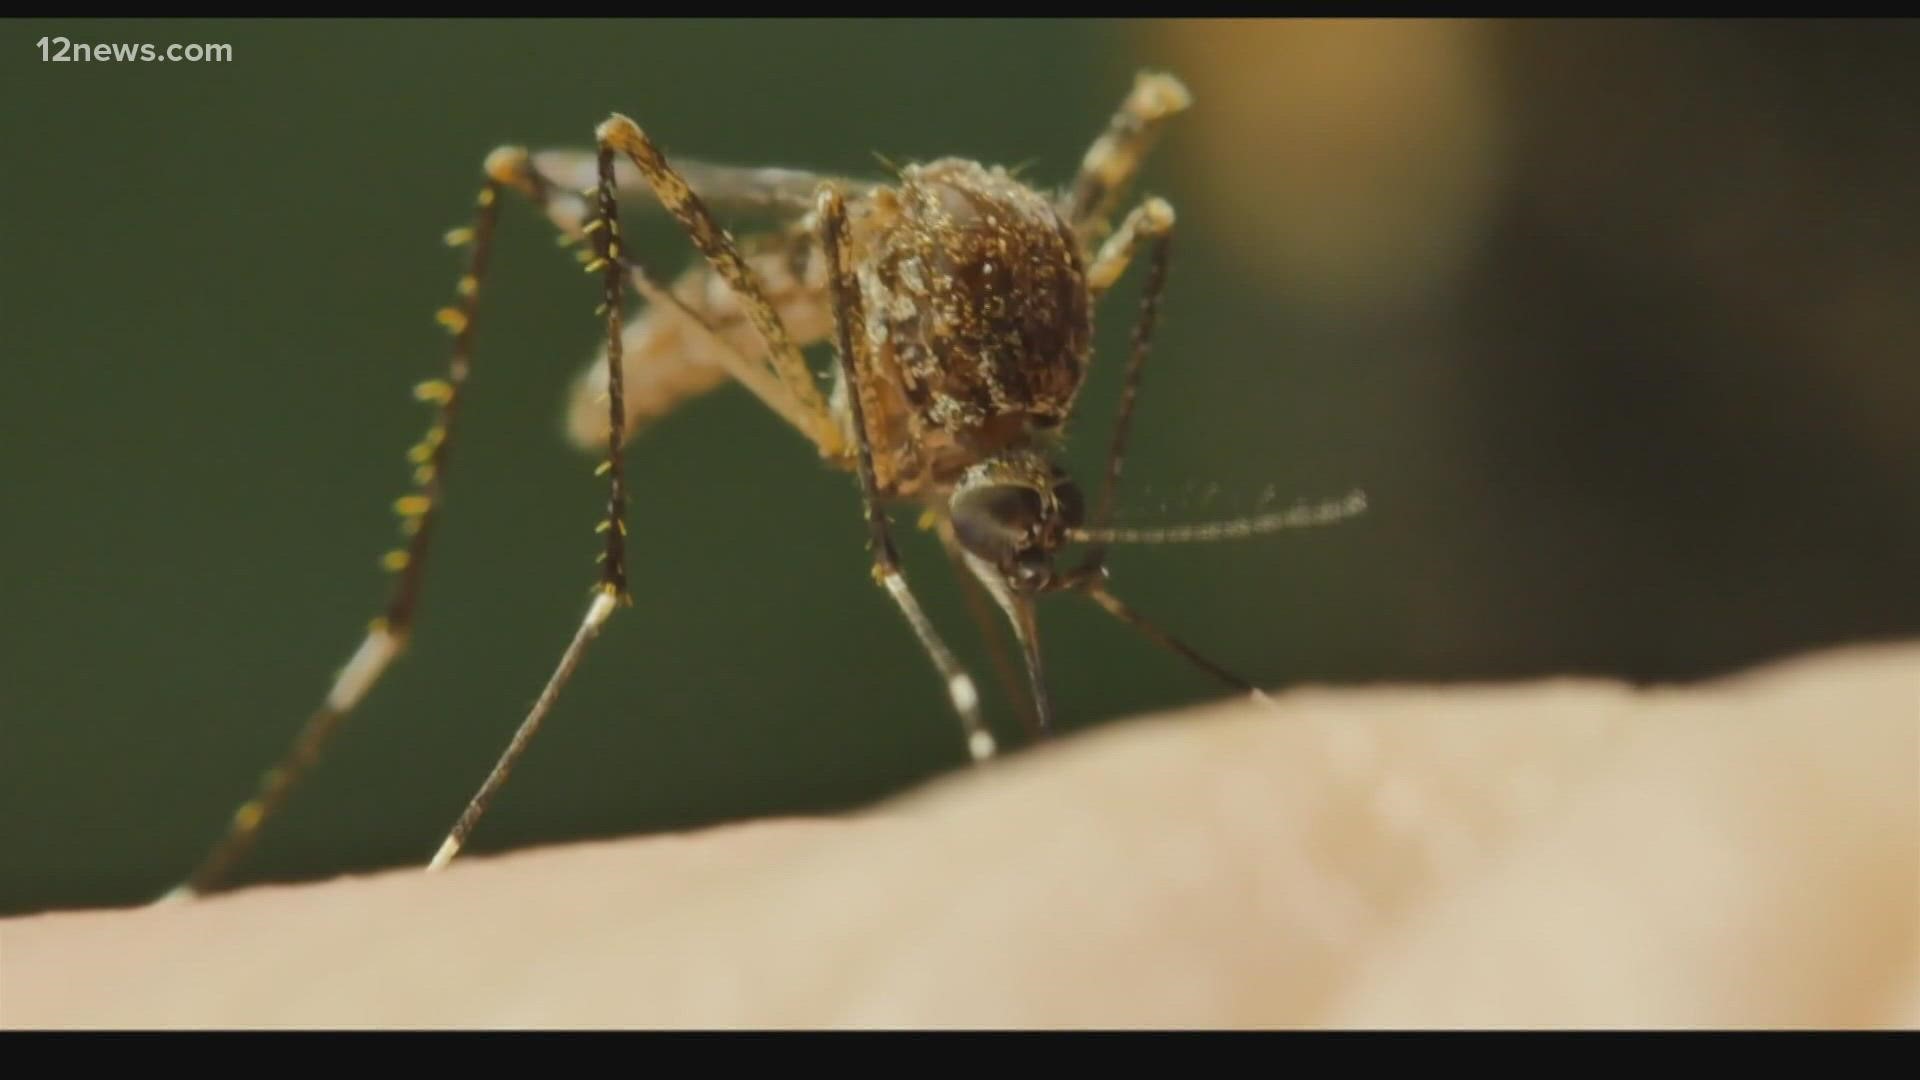 The wetter than normal monsoon season in Arizona is bringing out the mosquitoes. Here are some tips on to protect yourself from the pesky bugs.